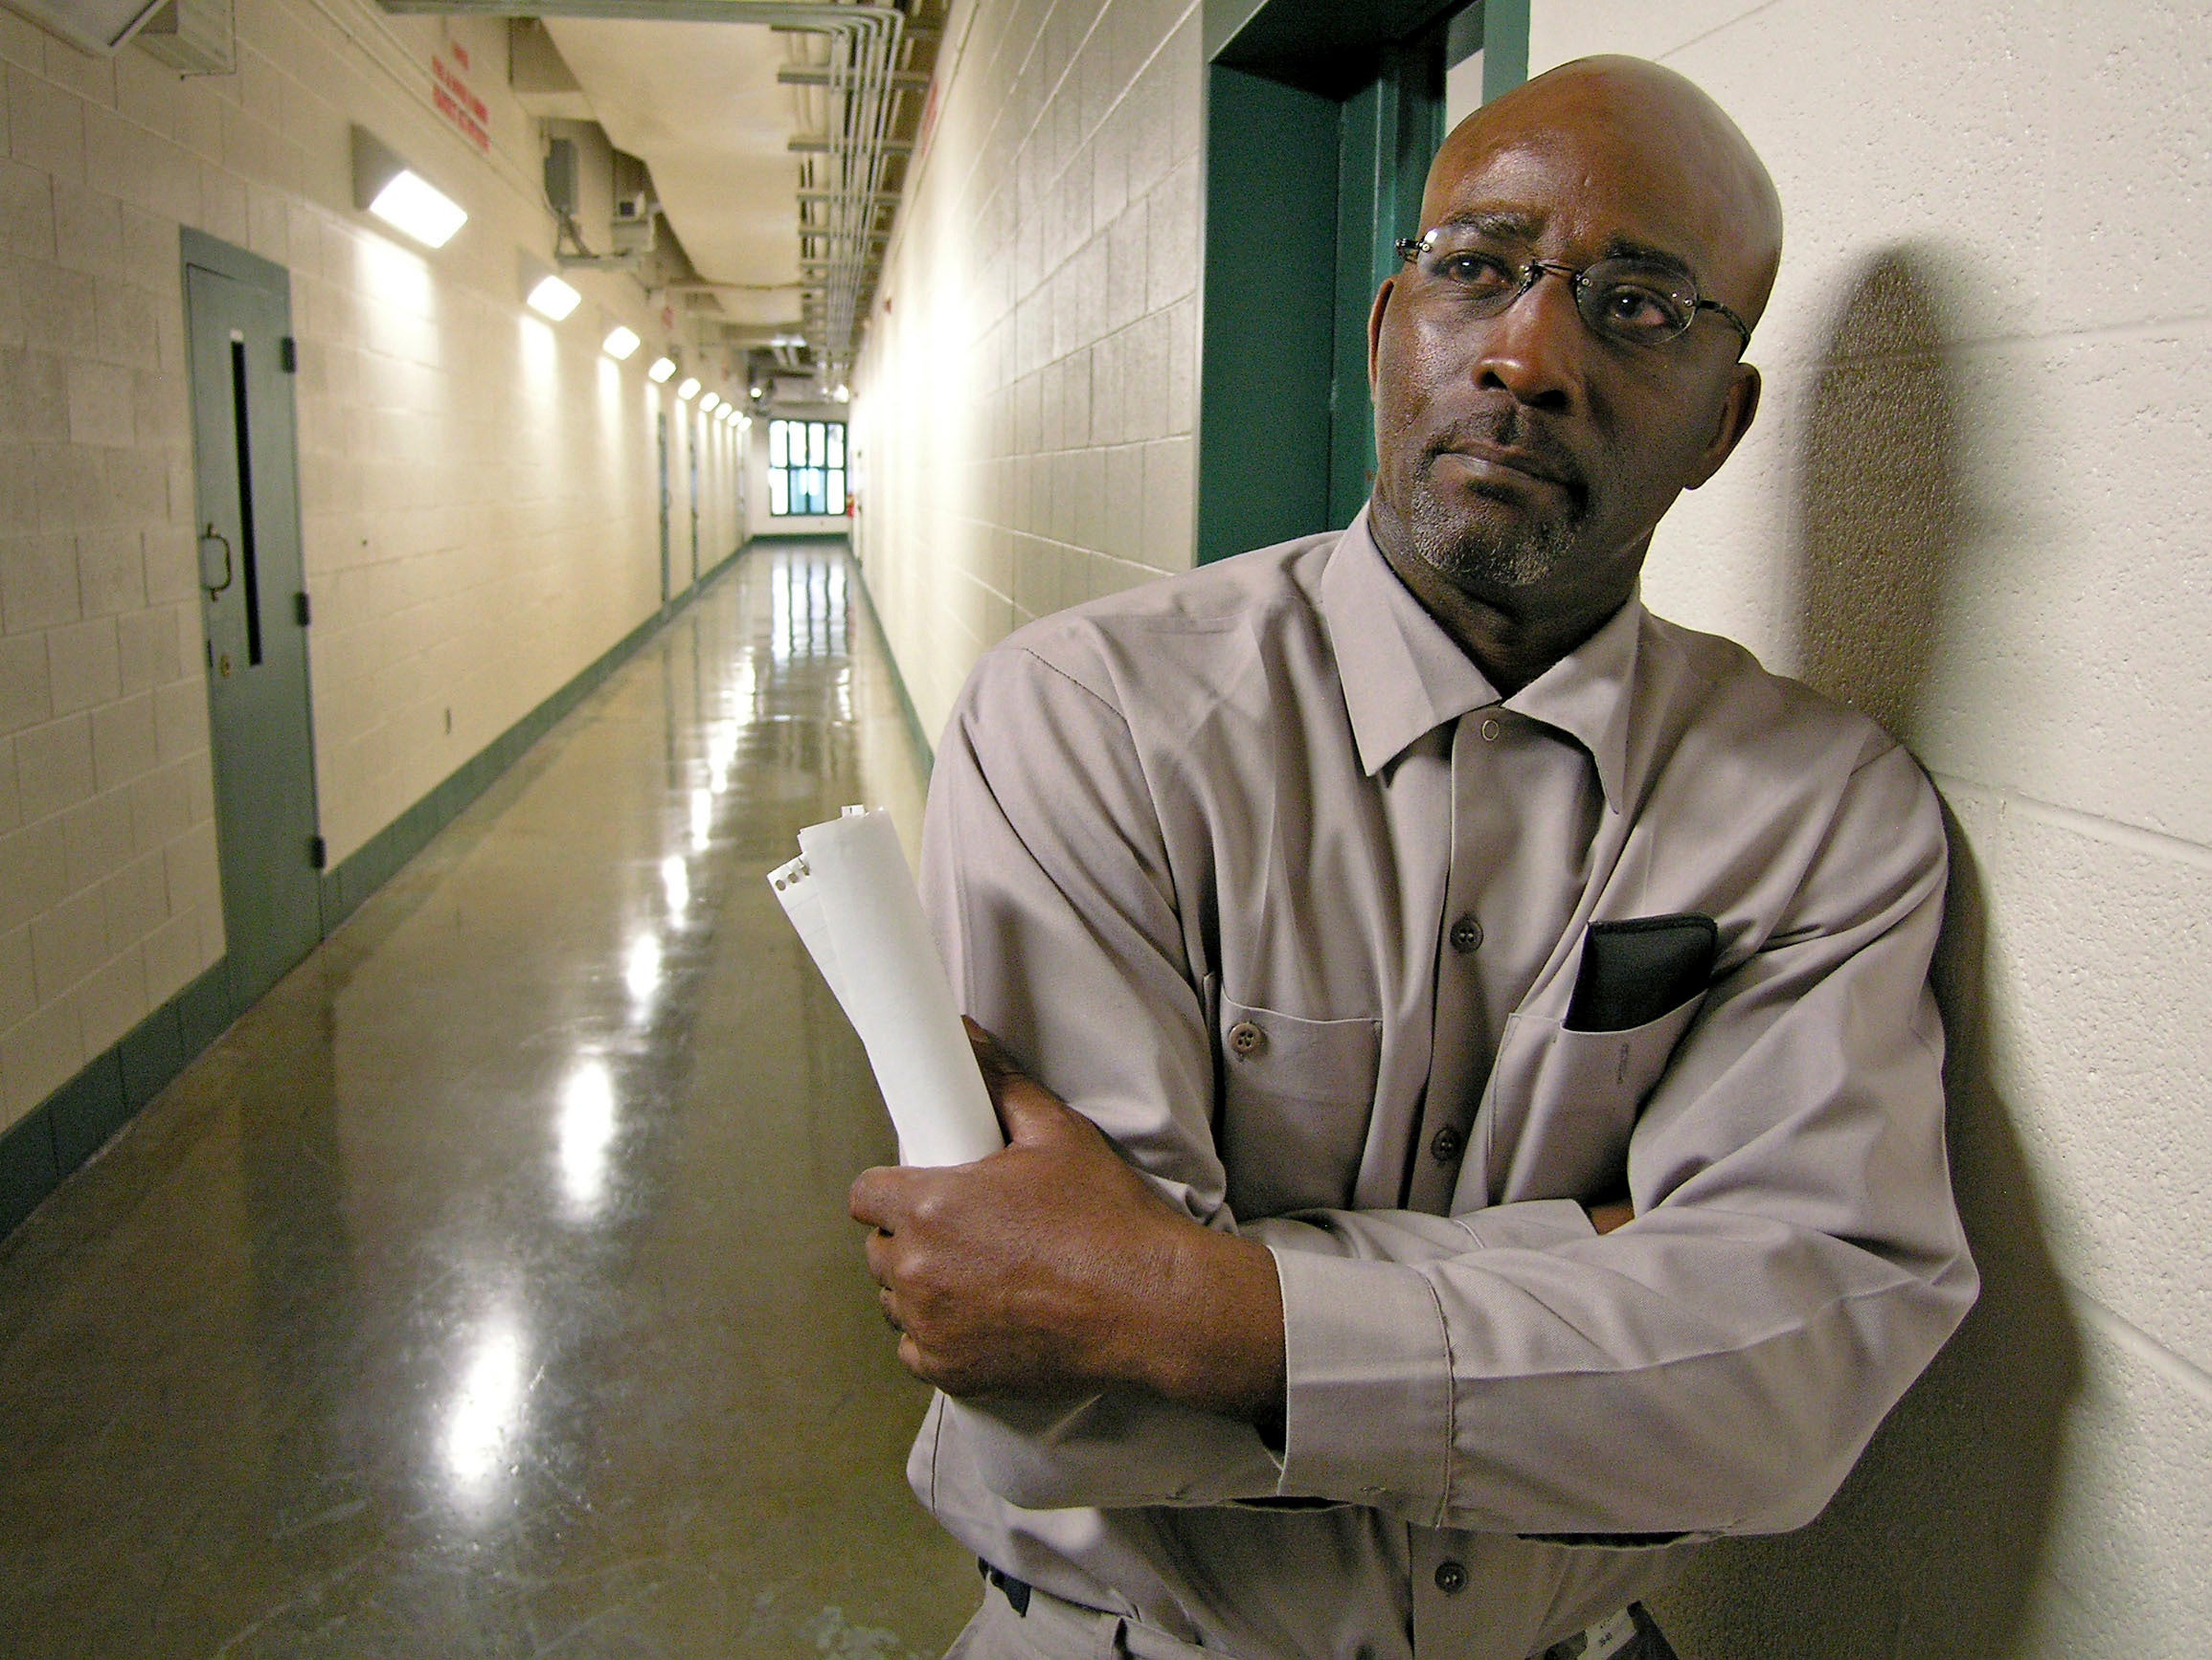 Ronnie Long stands in a hallway at the Albemarle Correctional Institution in Albemarle, North Carolina in 2007